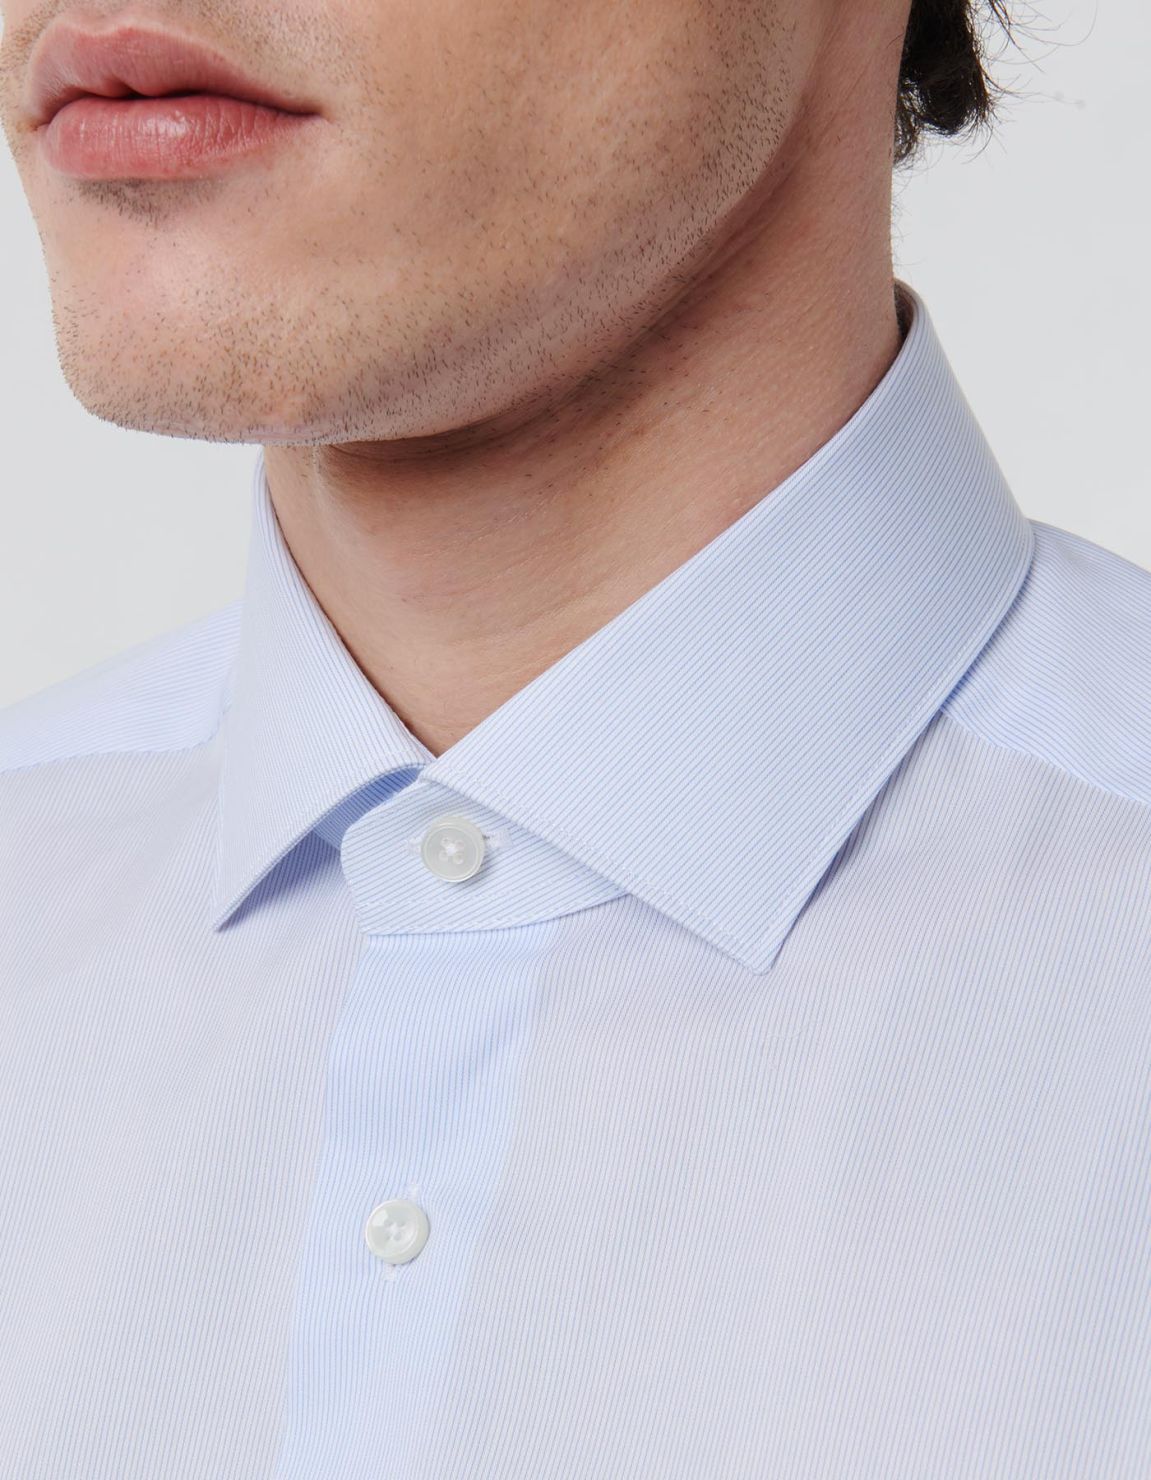 White Twill Solid colour Shirt Collar small cutaway Evolution Classic Fit 7